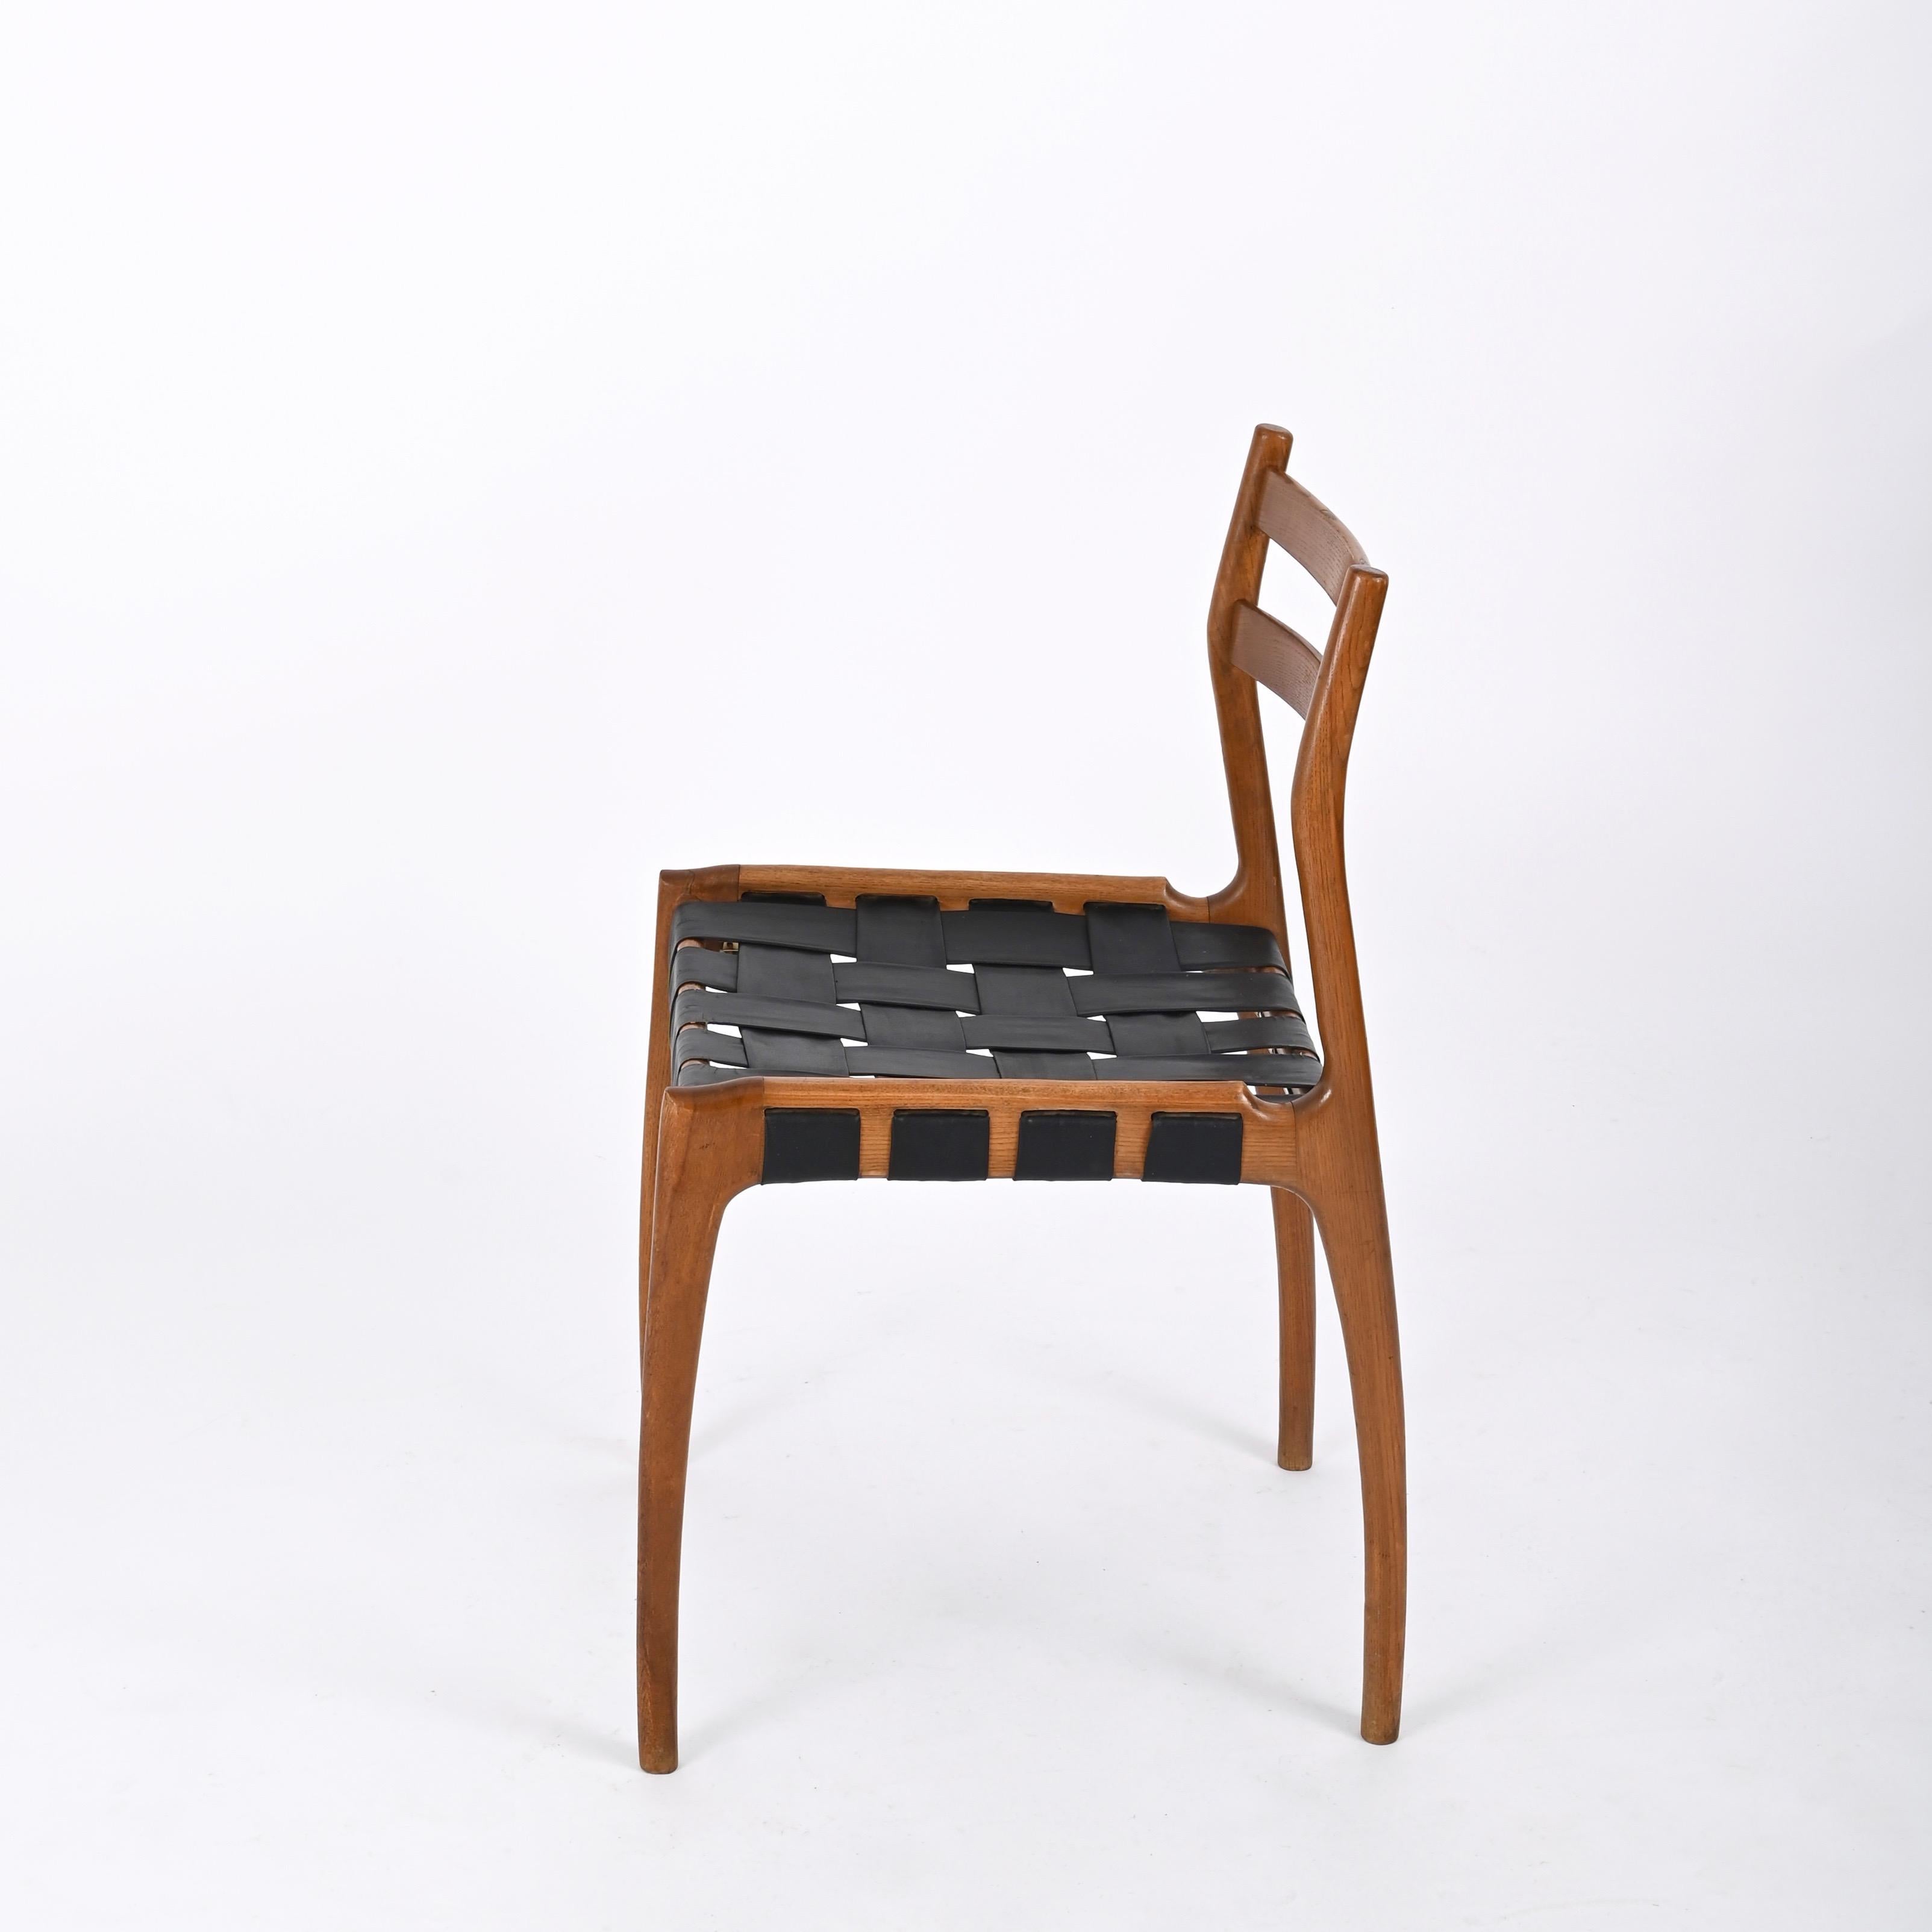 Hand-Crafted Italian Mid-Century Chair in Oak and Leather by Palange for Montina, 1960s For Sale